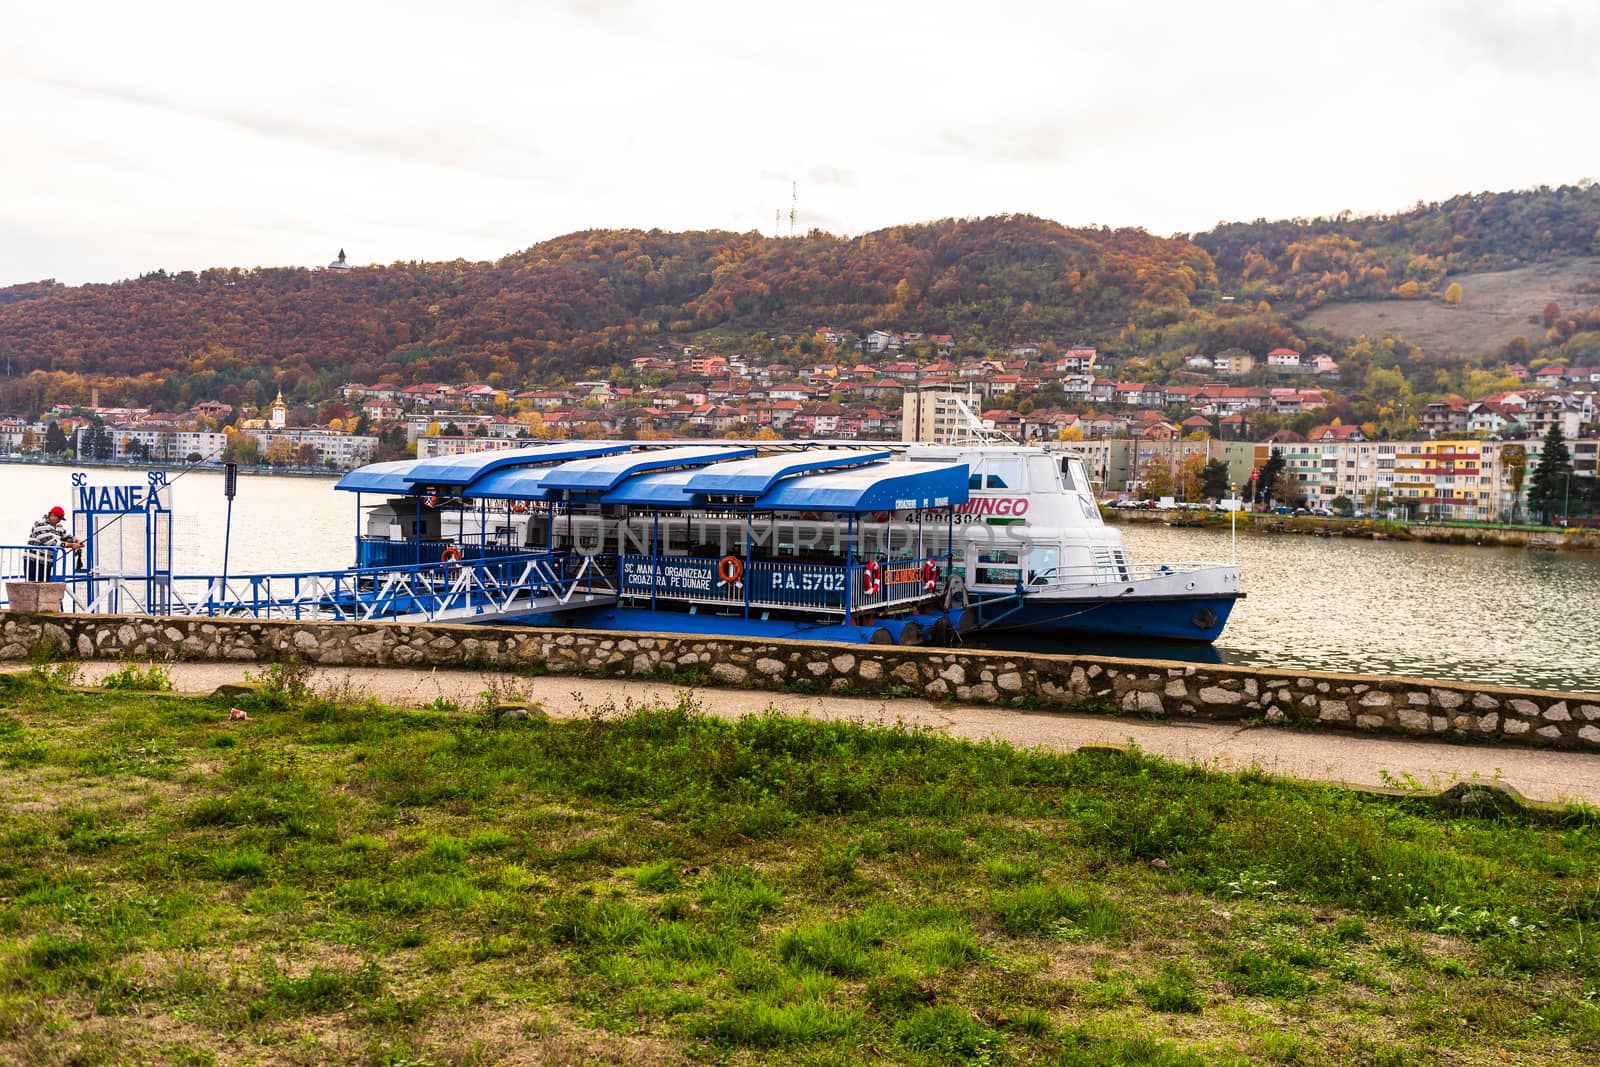 Old cruise ship, Danube river view from Orsova, Romania, 2020. by vladispas